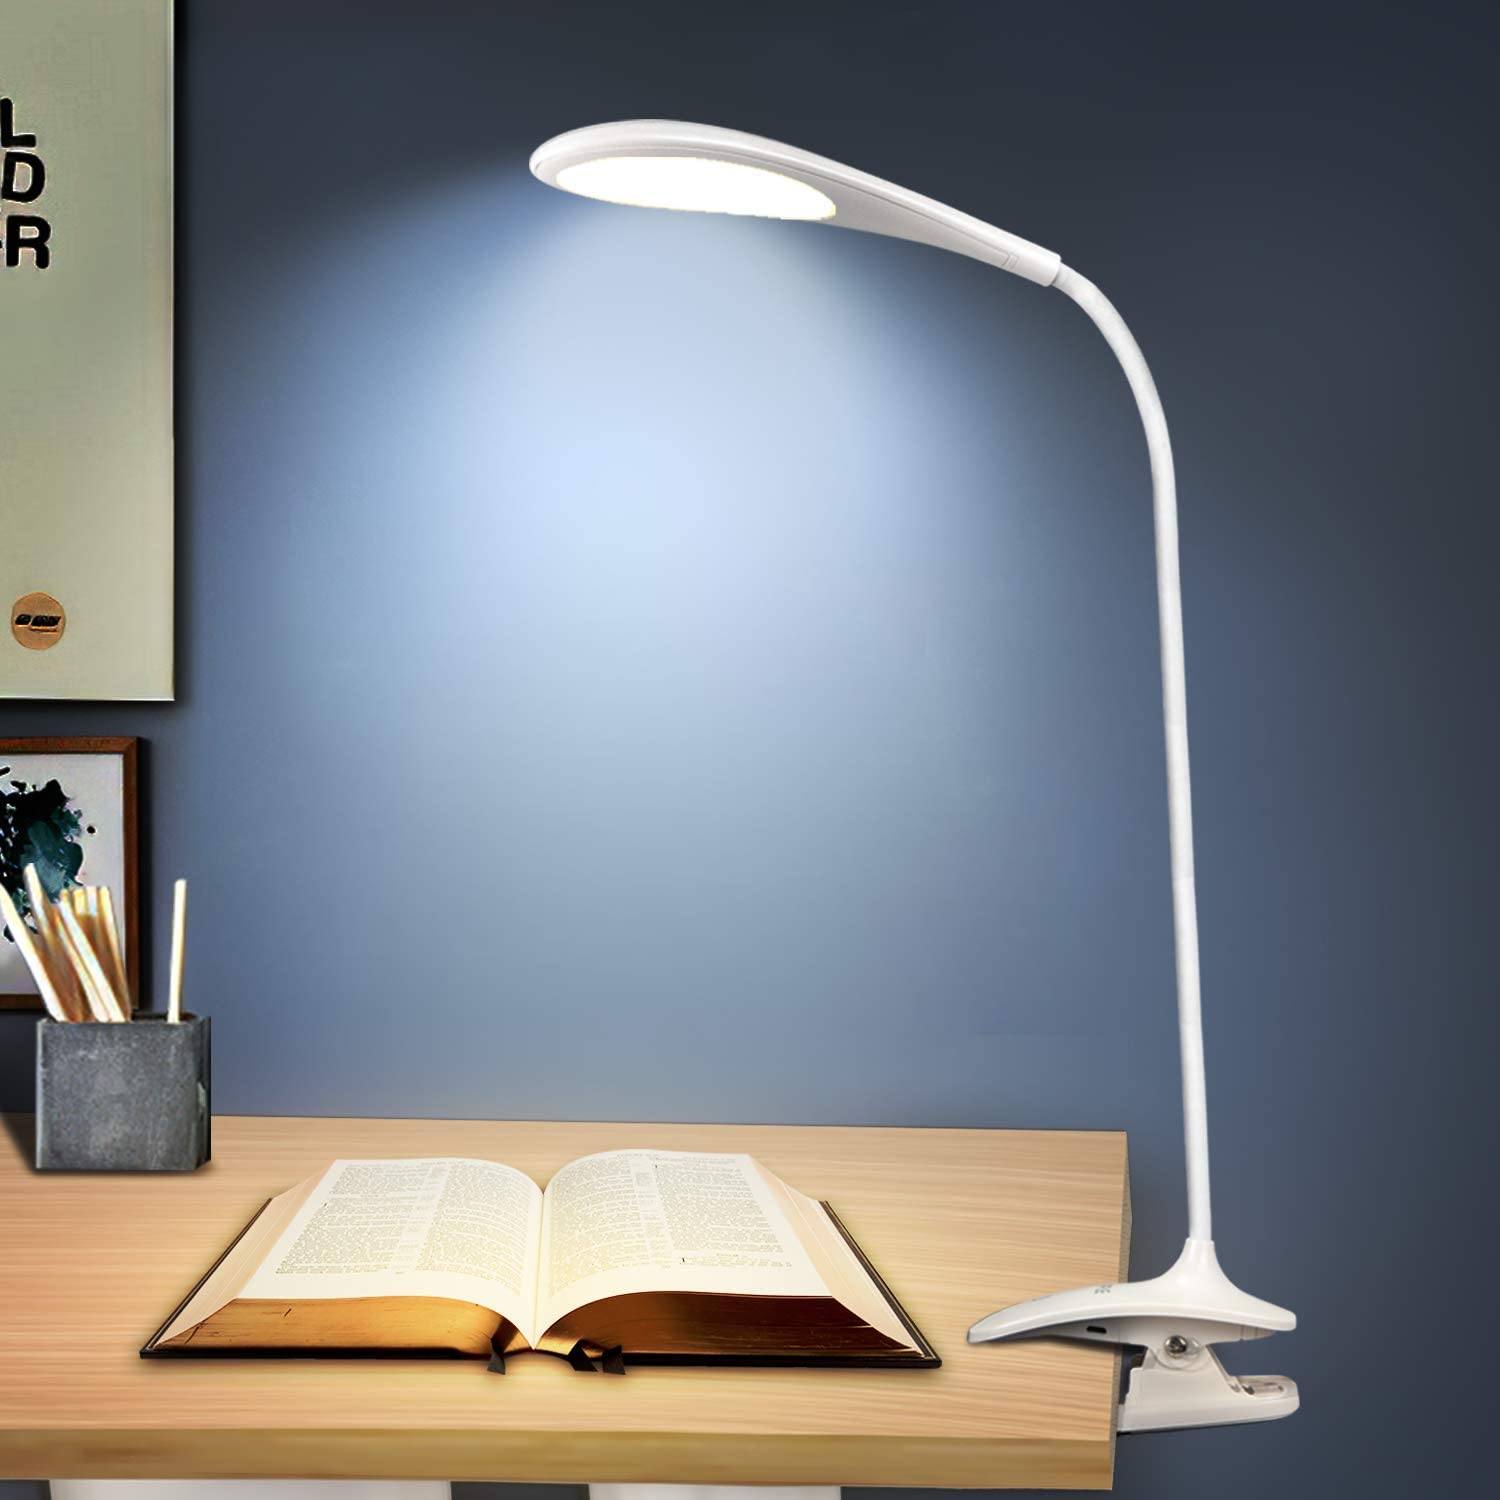 Best Table Lamp For Study Business, Best Table Lamp For Studying